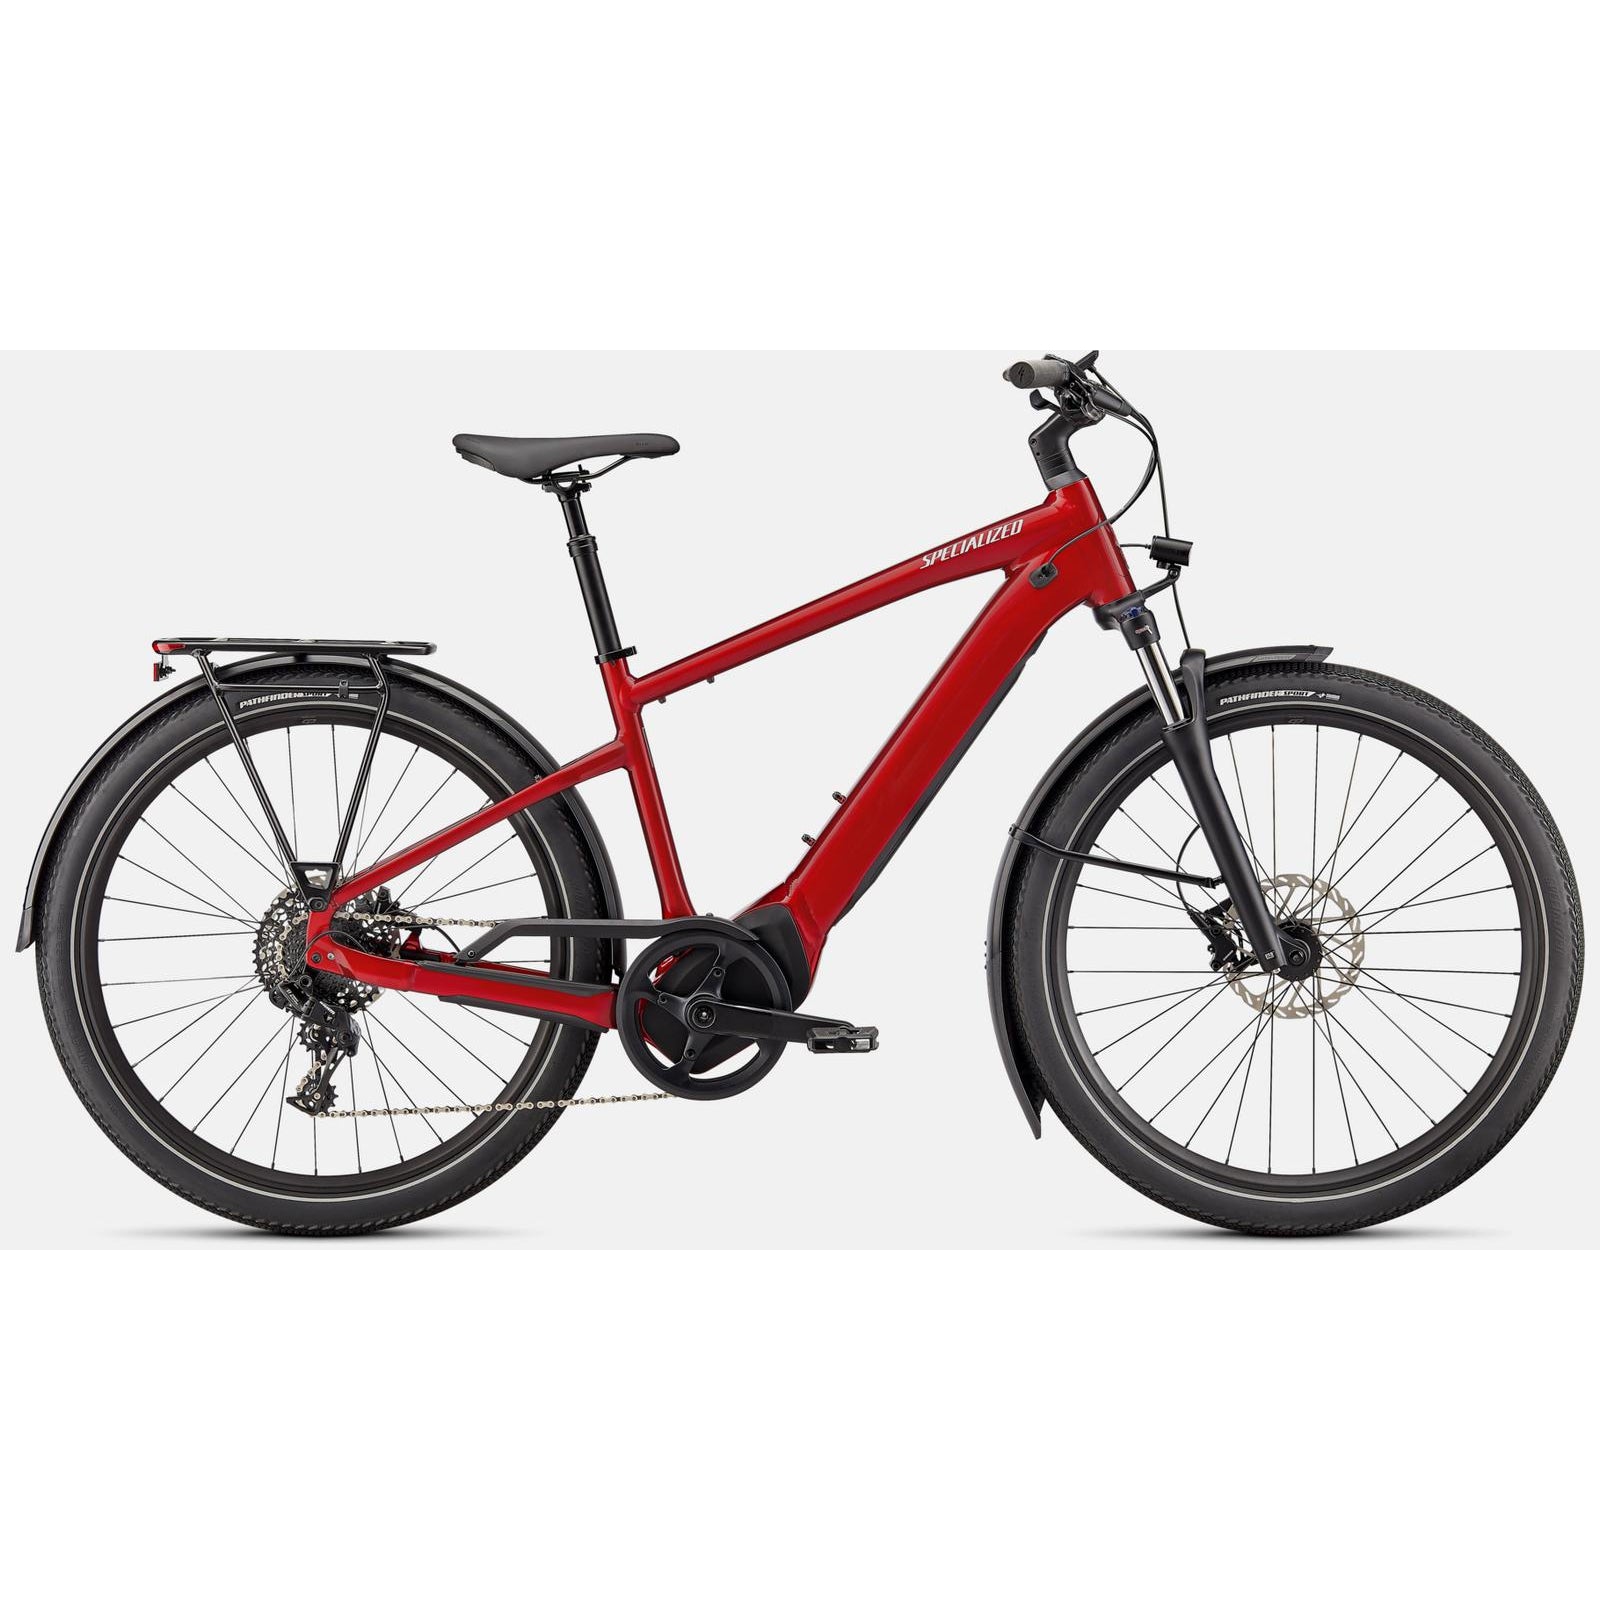 Specialized Turbo Vado 4.0 Active Electric Bike - Bikes - Bicycle Warehouse